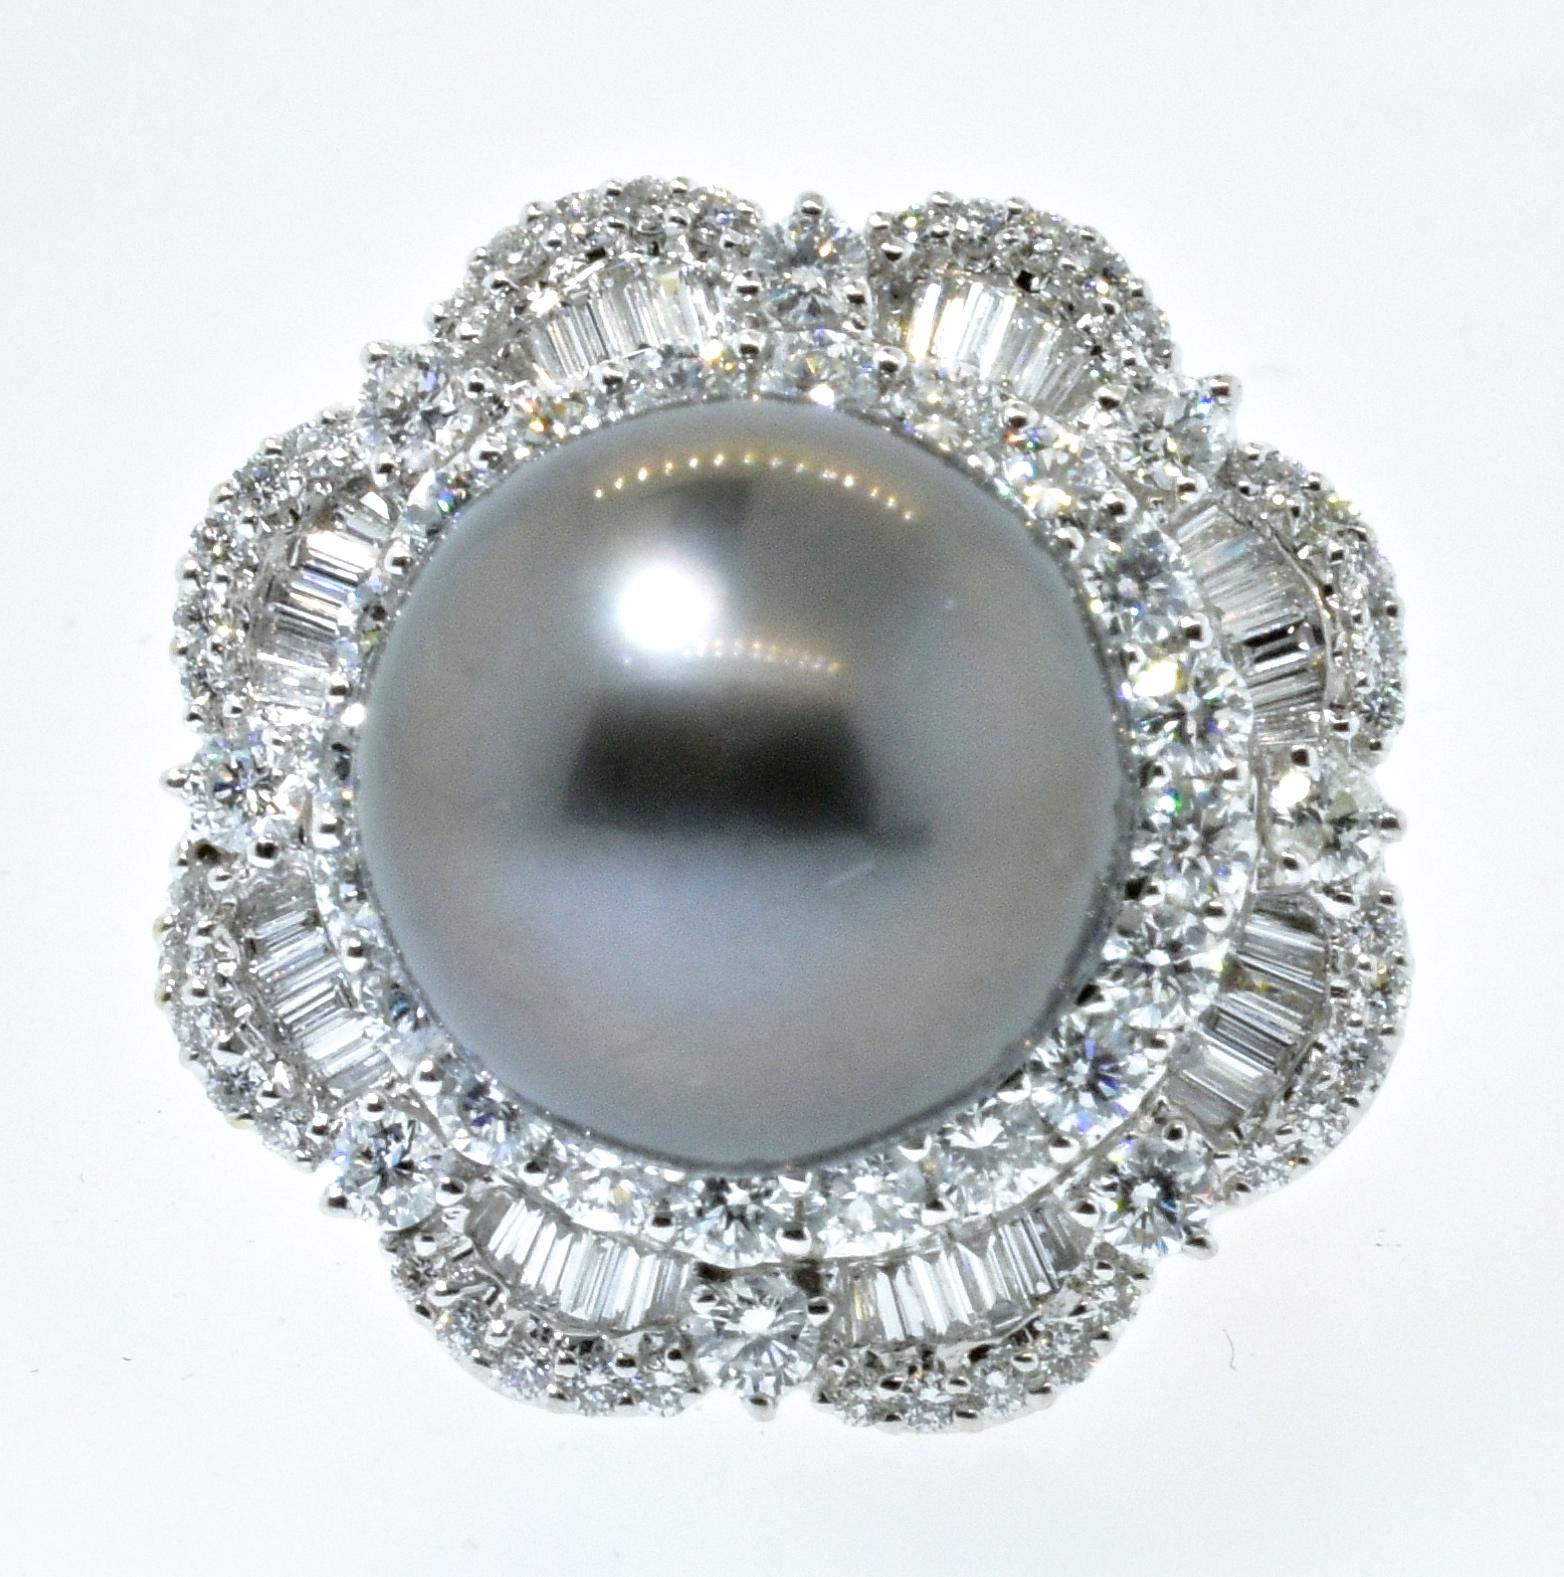 Tahitian pearl of 14.5 mm, with fine color, perfectly round, clean and with a  fine depth of nacre.  This 18K white gold ring has 4.5 cts., of very fine diamonds - all near colorless, G, and very slightly included, VS.  Well made with fine